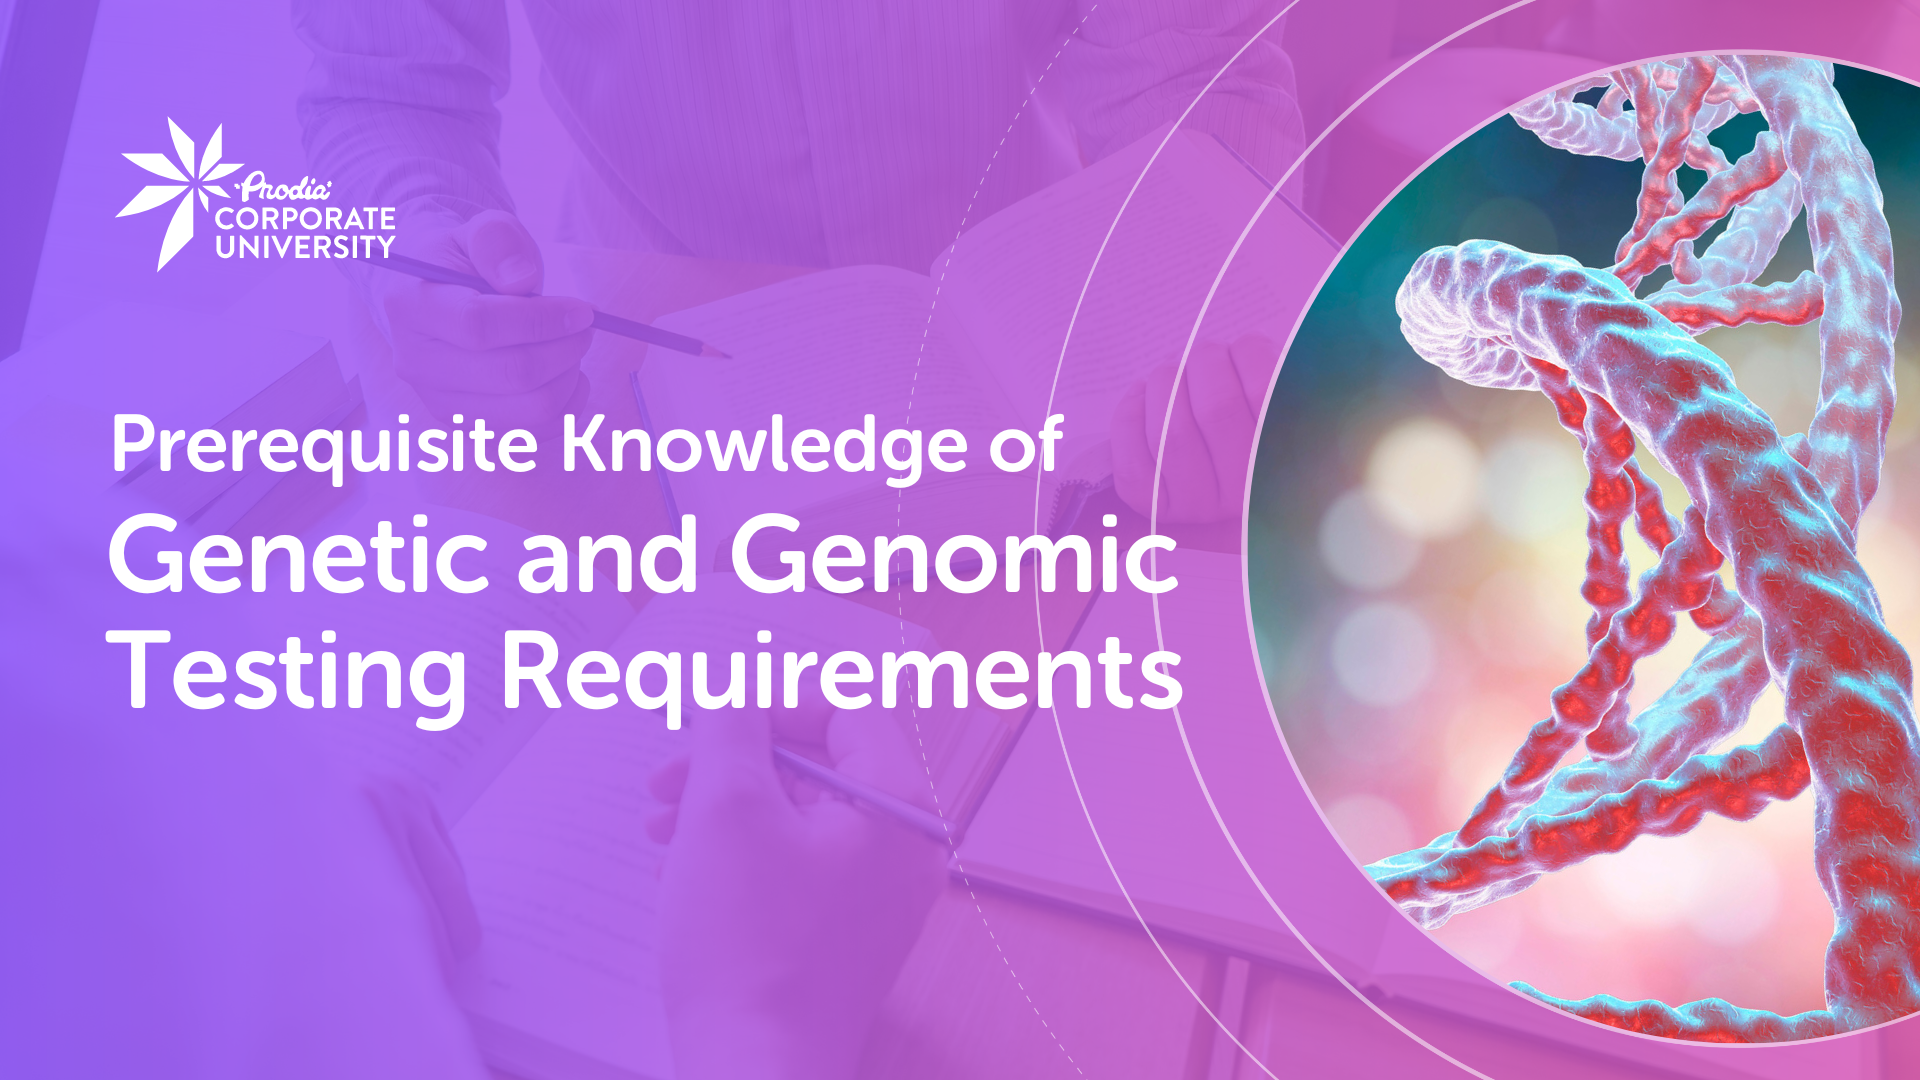 Prerequisite Knowledge of Genetic and Genomic Testing Requirements